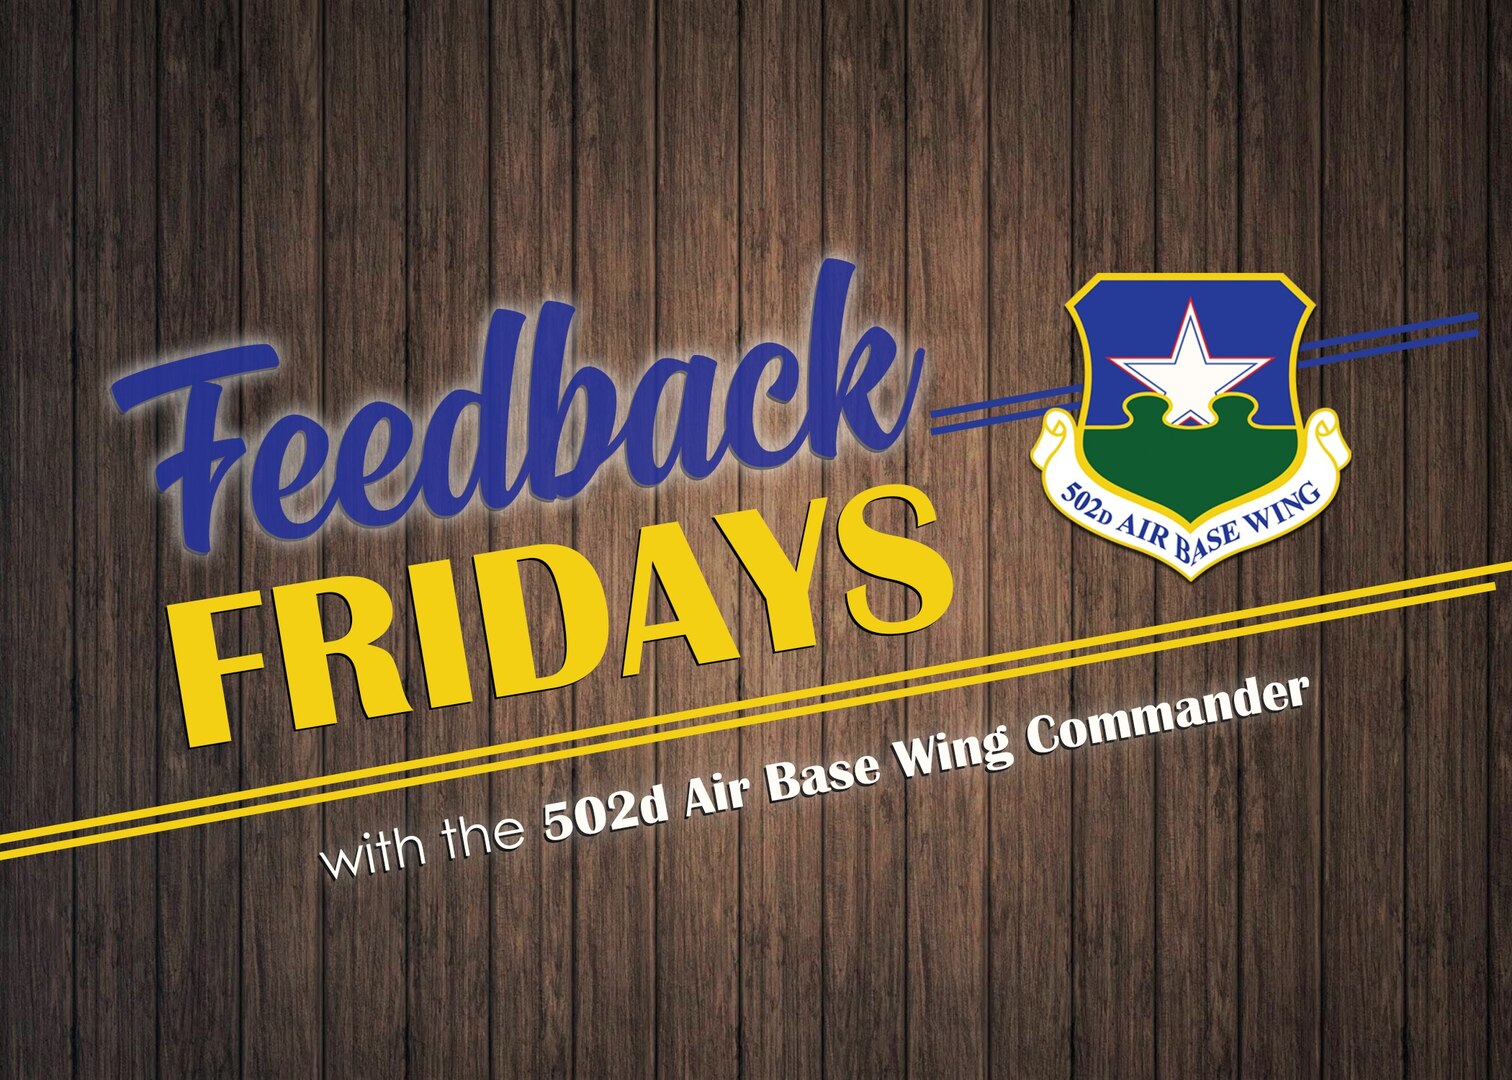 Feedback Fridays is a weekly forum that aims to connect the 502d Air Base Wing with members of the Joint Base San Antonio community. Questions are collected during commander's calls, town hall meetings and throughout the week. If you have a question or concern, please send an email to RandolphPublicAffairs@us.af.mil using the subject line "Feedback Fridays." Questions will be further researched and published as information becomes available.